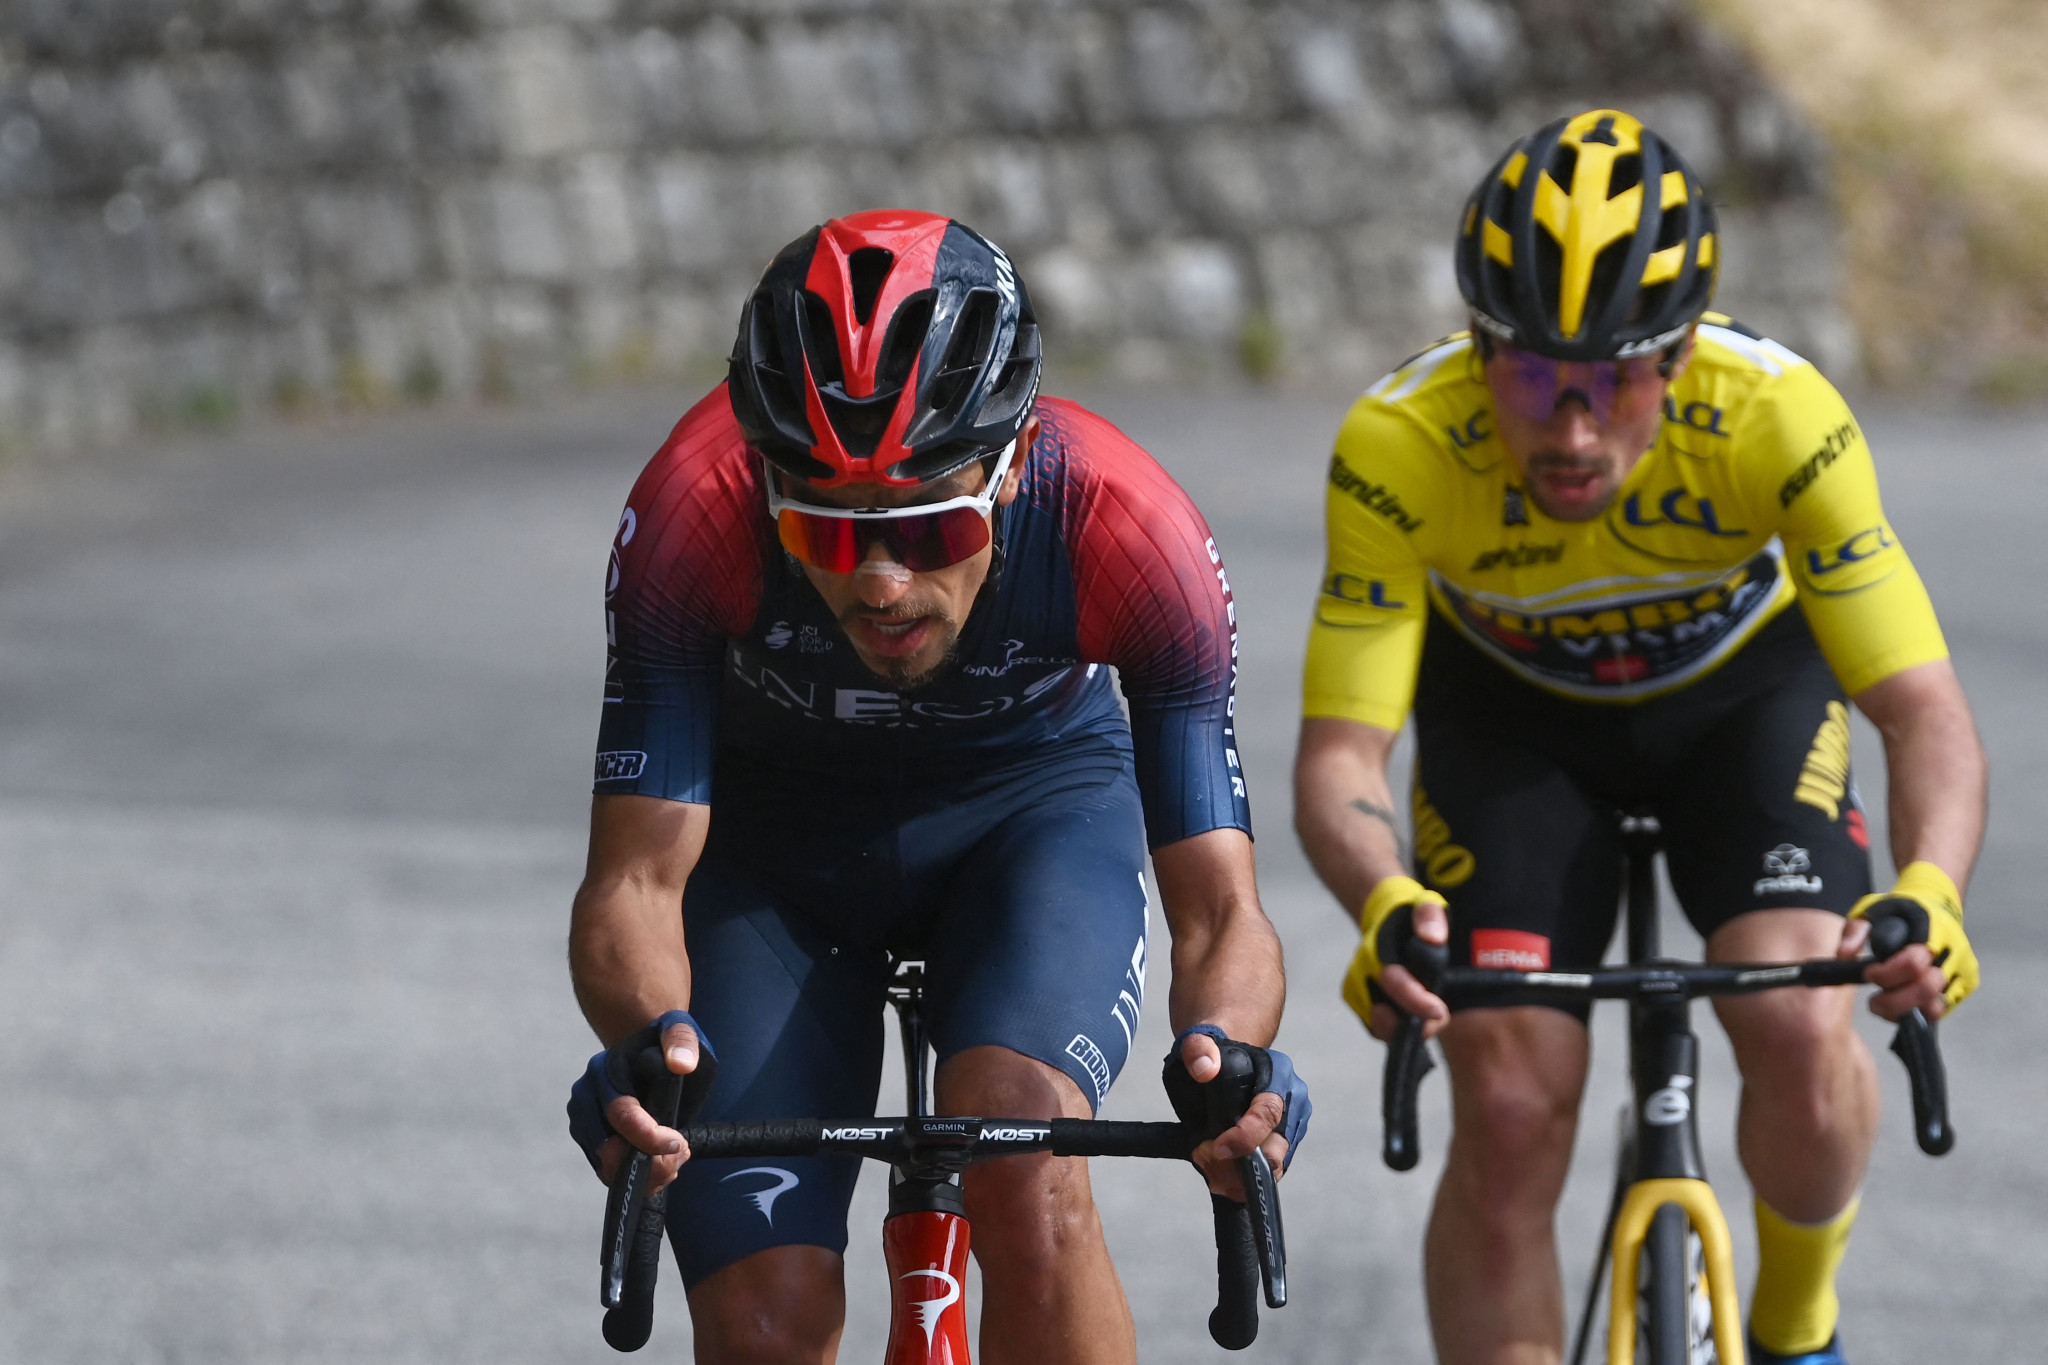 Martínez wins fourth stage at Tour of the Basque Country, Roglič in lead